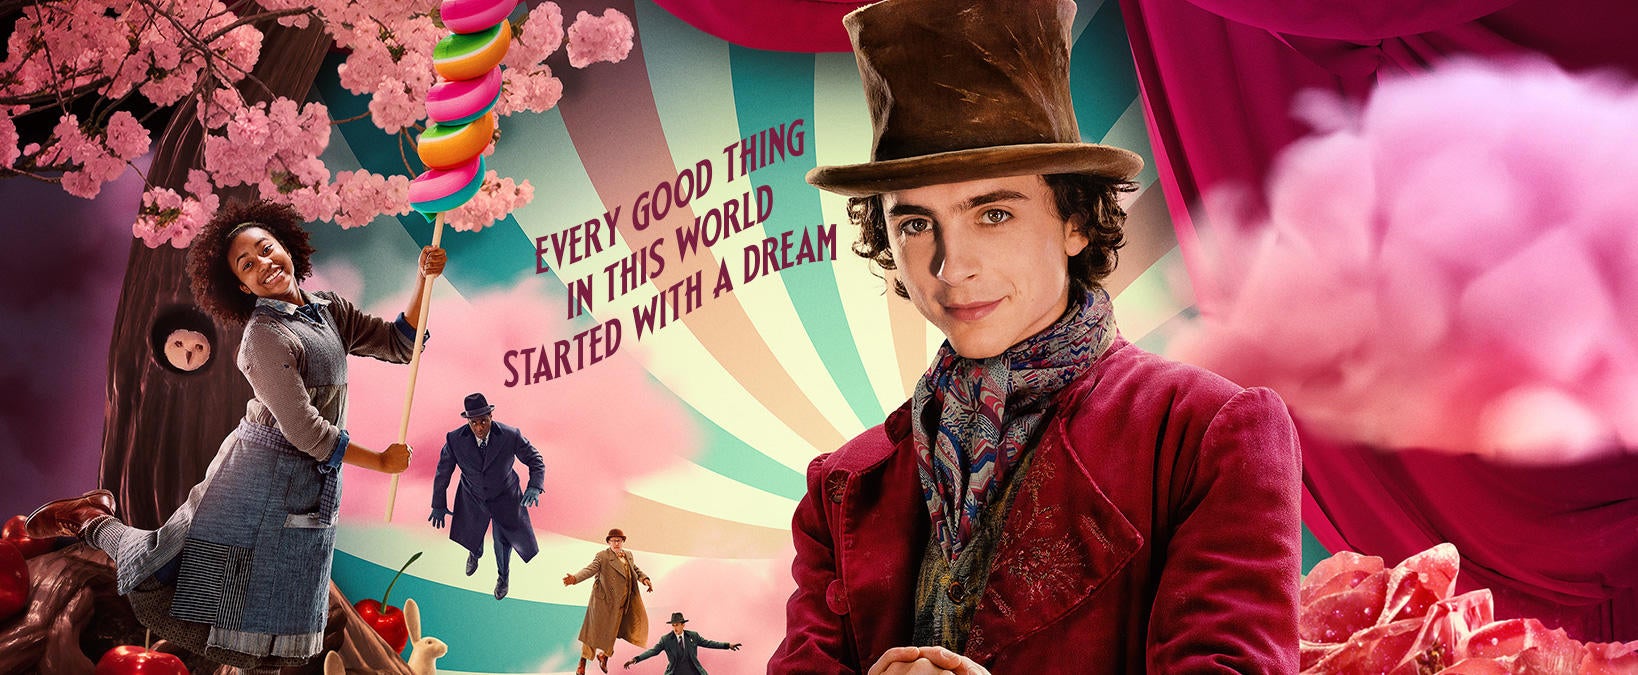 New Wonka Movie Poster Highlights the Candy on Halloween